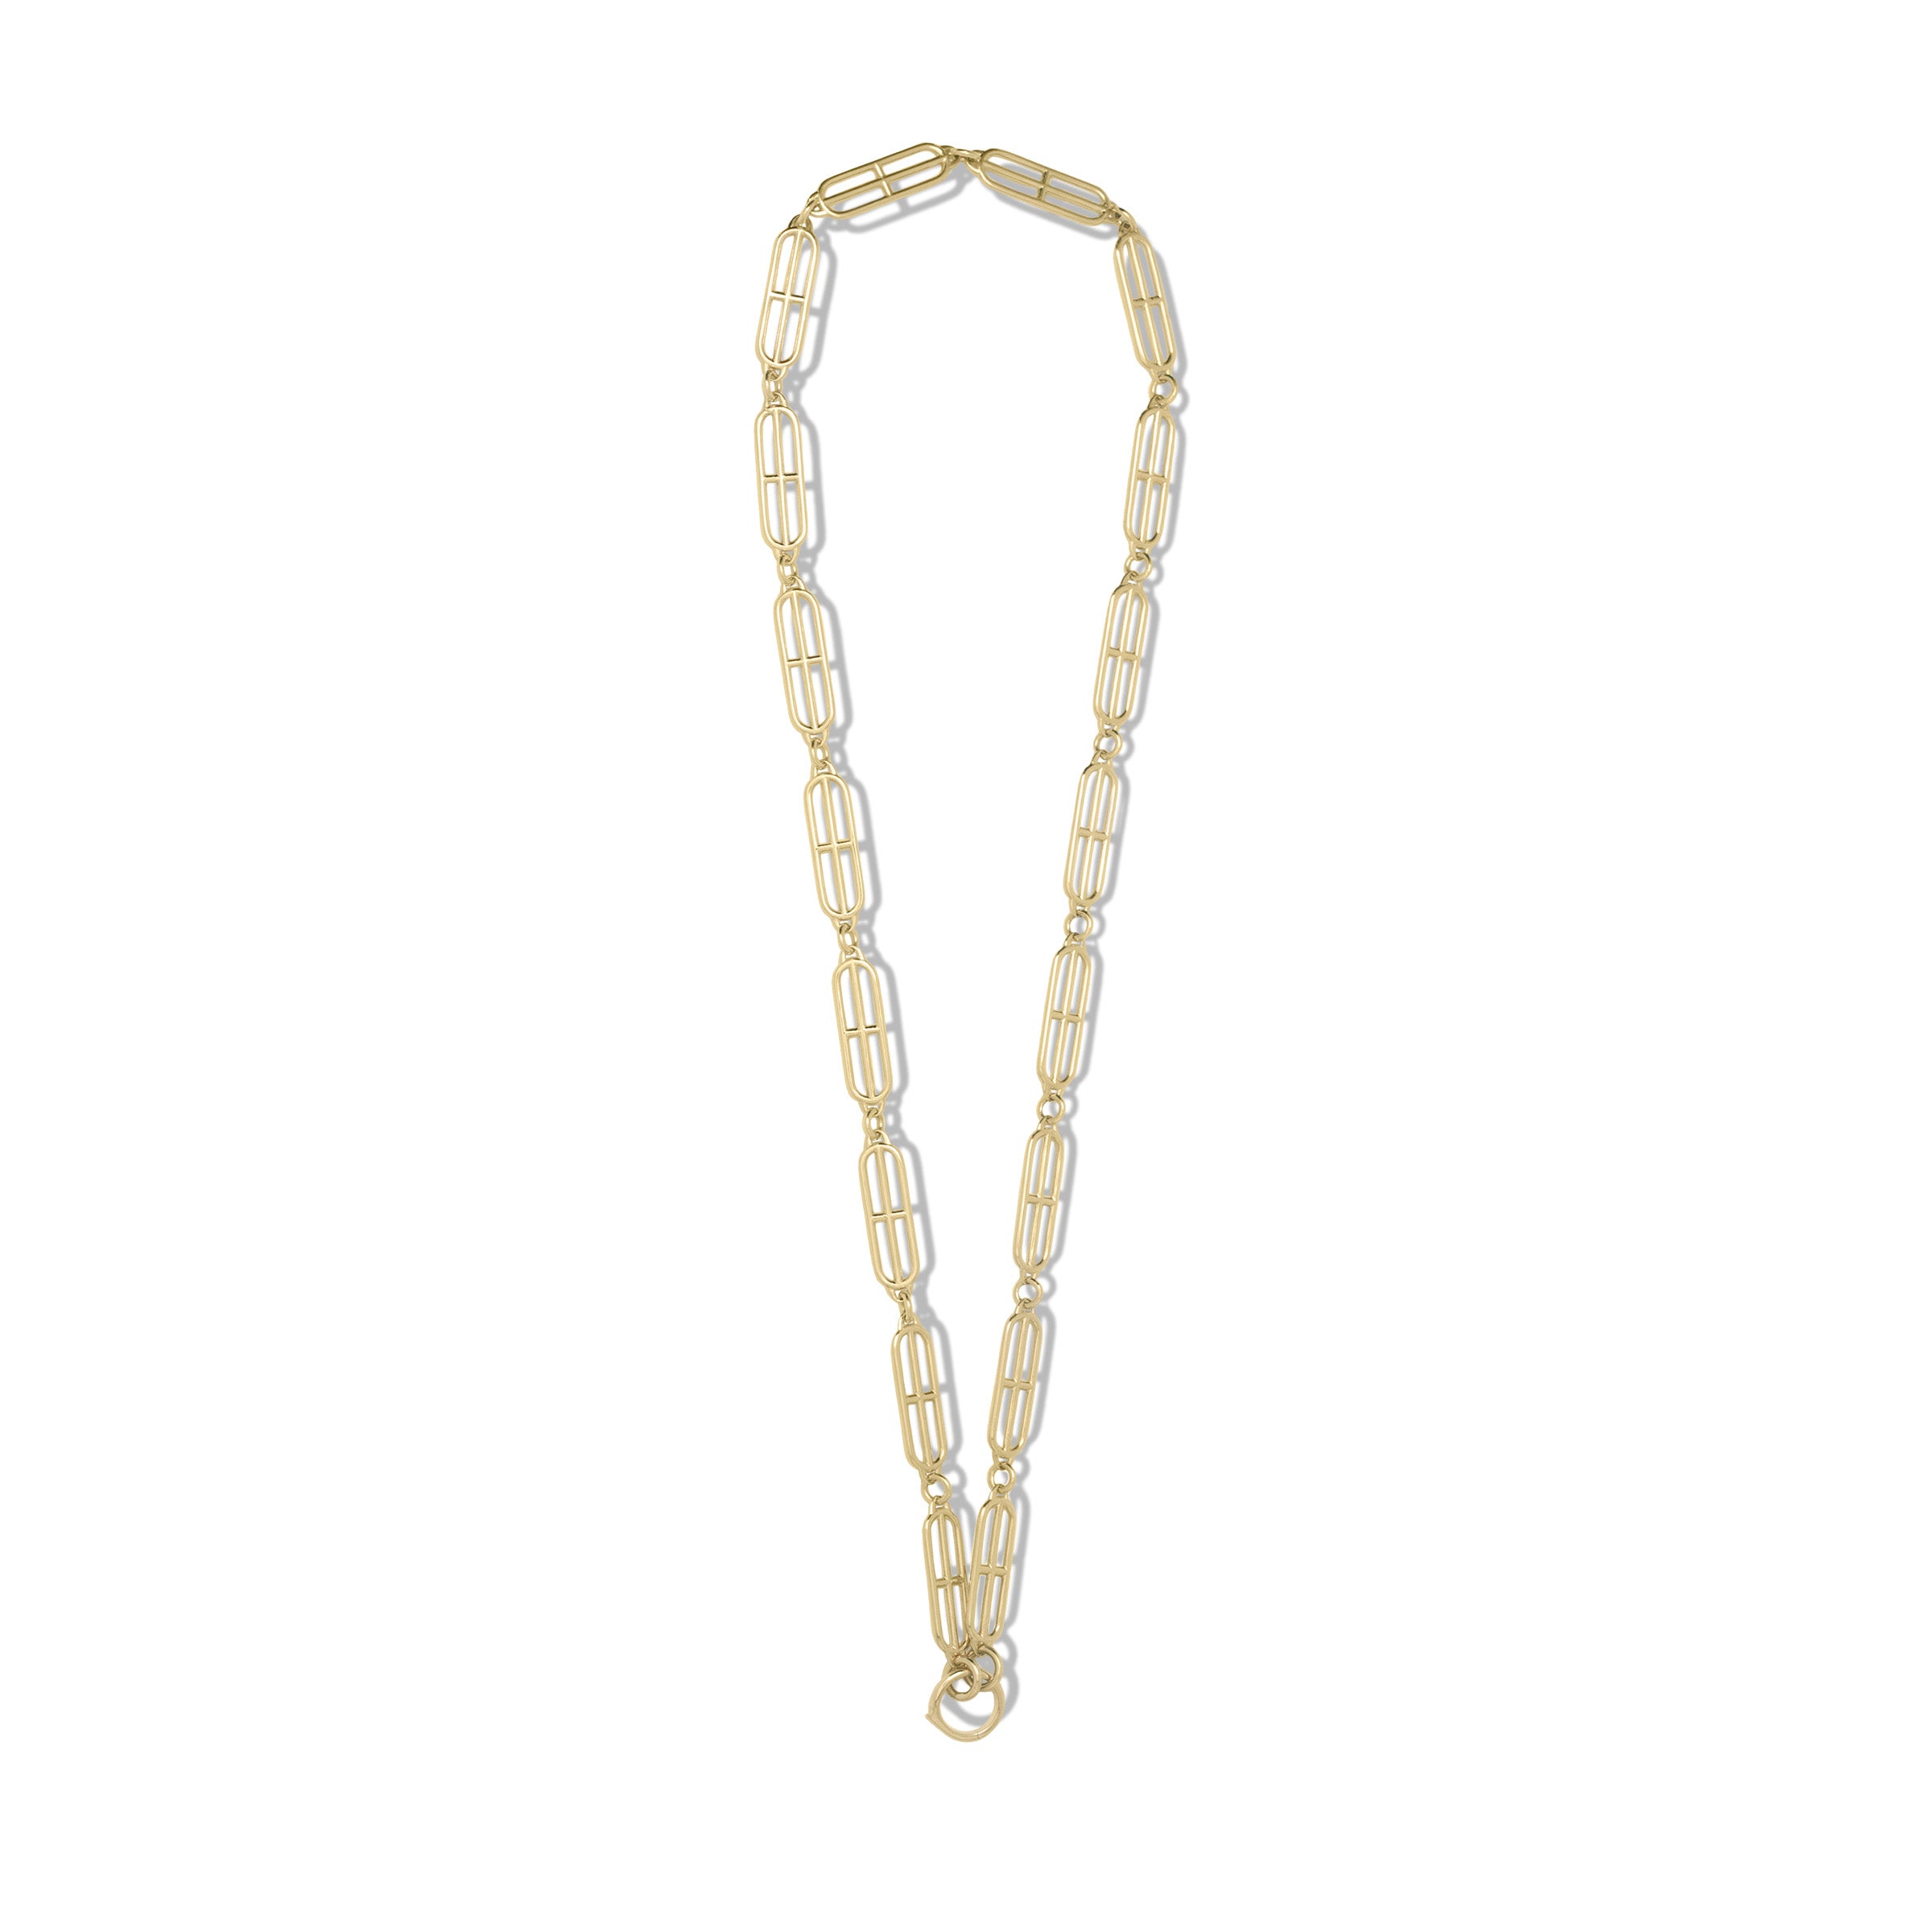 Geometric Paperclip chain in 14k solid gold, top view with white background